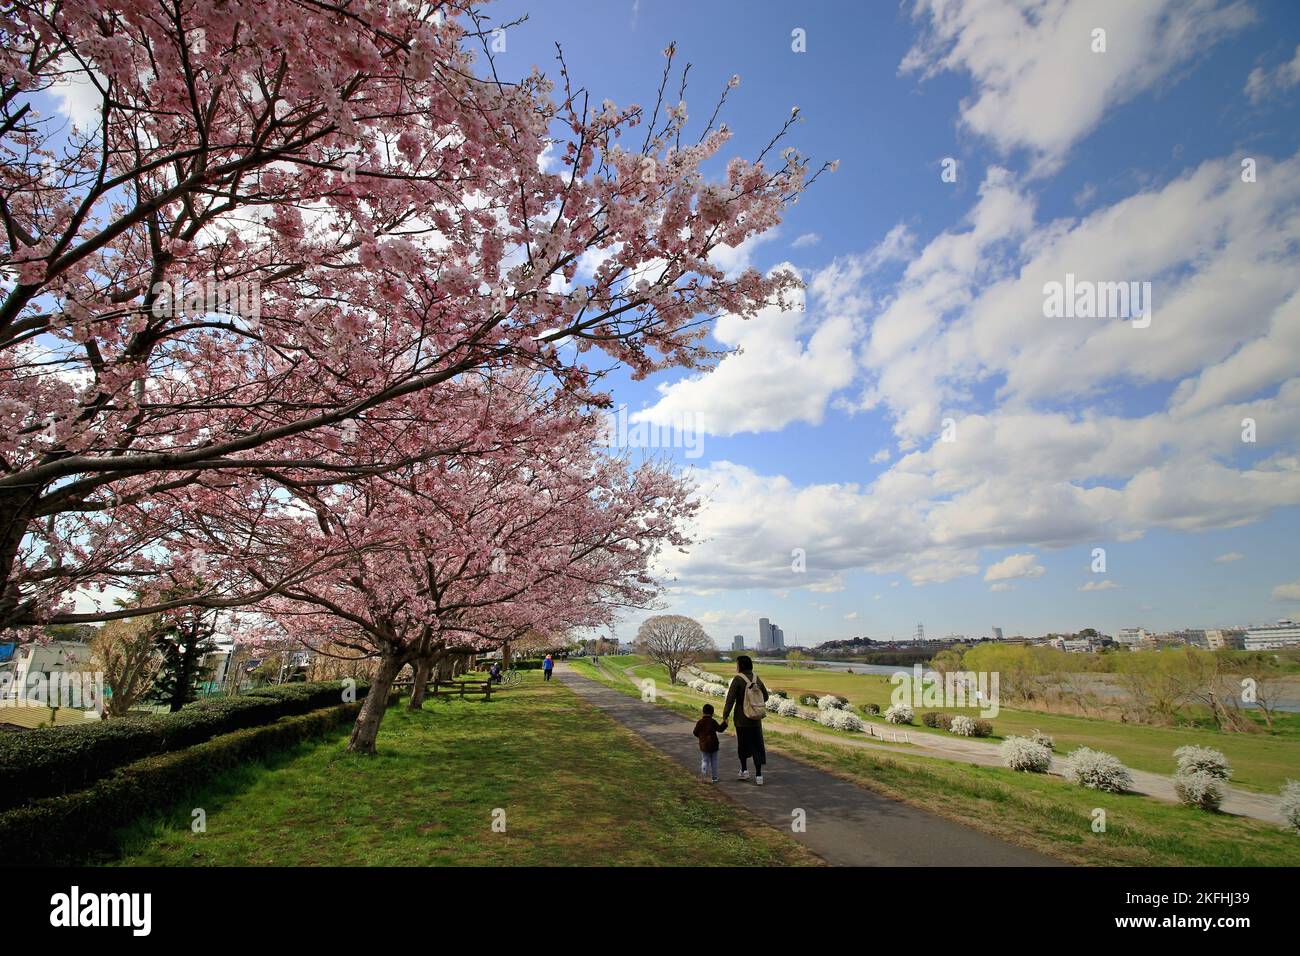 Scenery of Japan People enjoying cherry blossom viewing Stock Photo